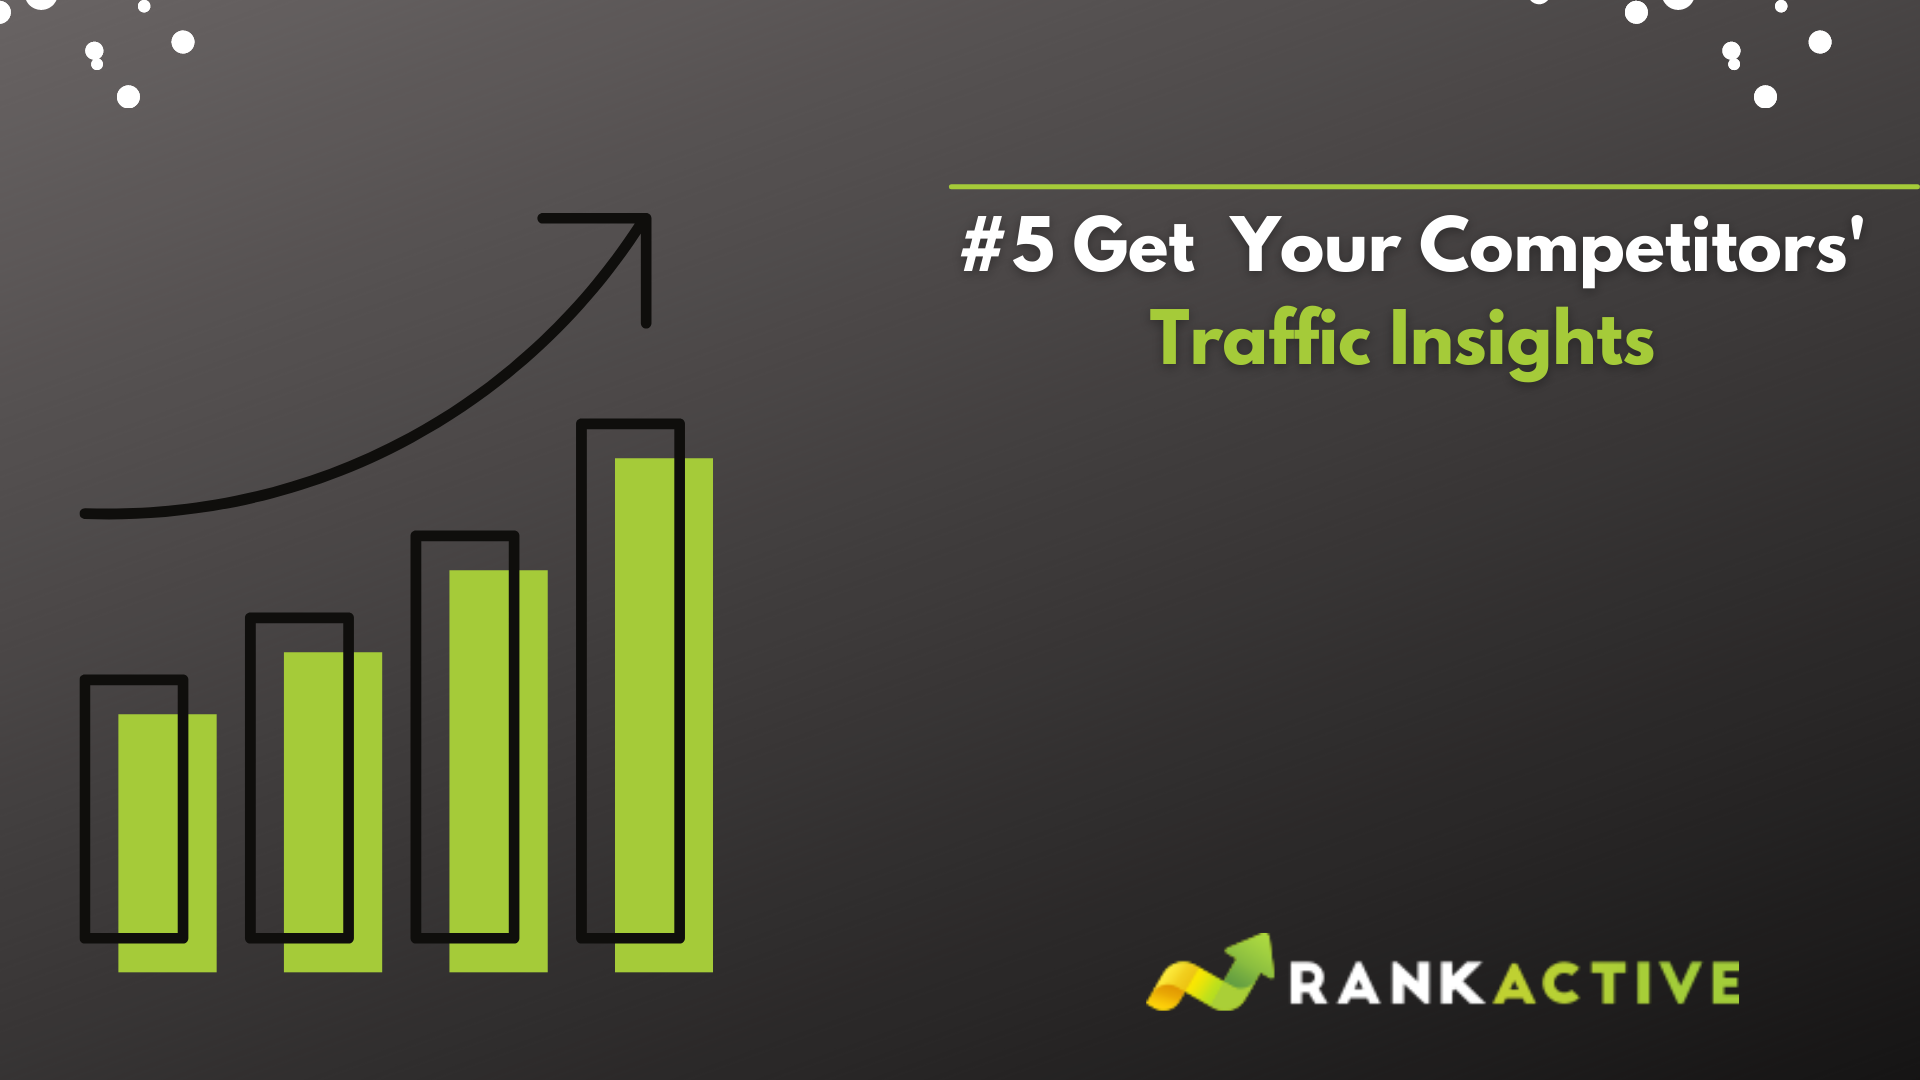 #5 Get your competitors' traffic insights